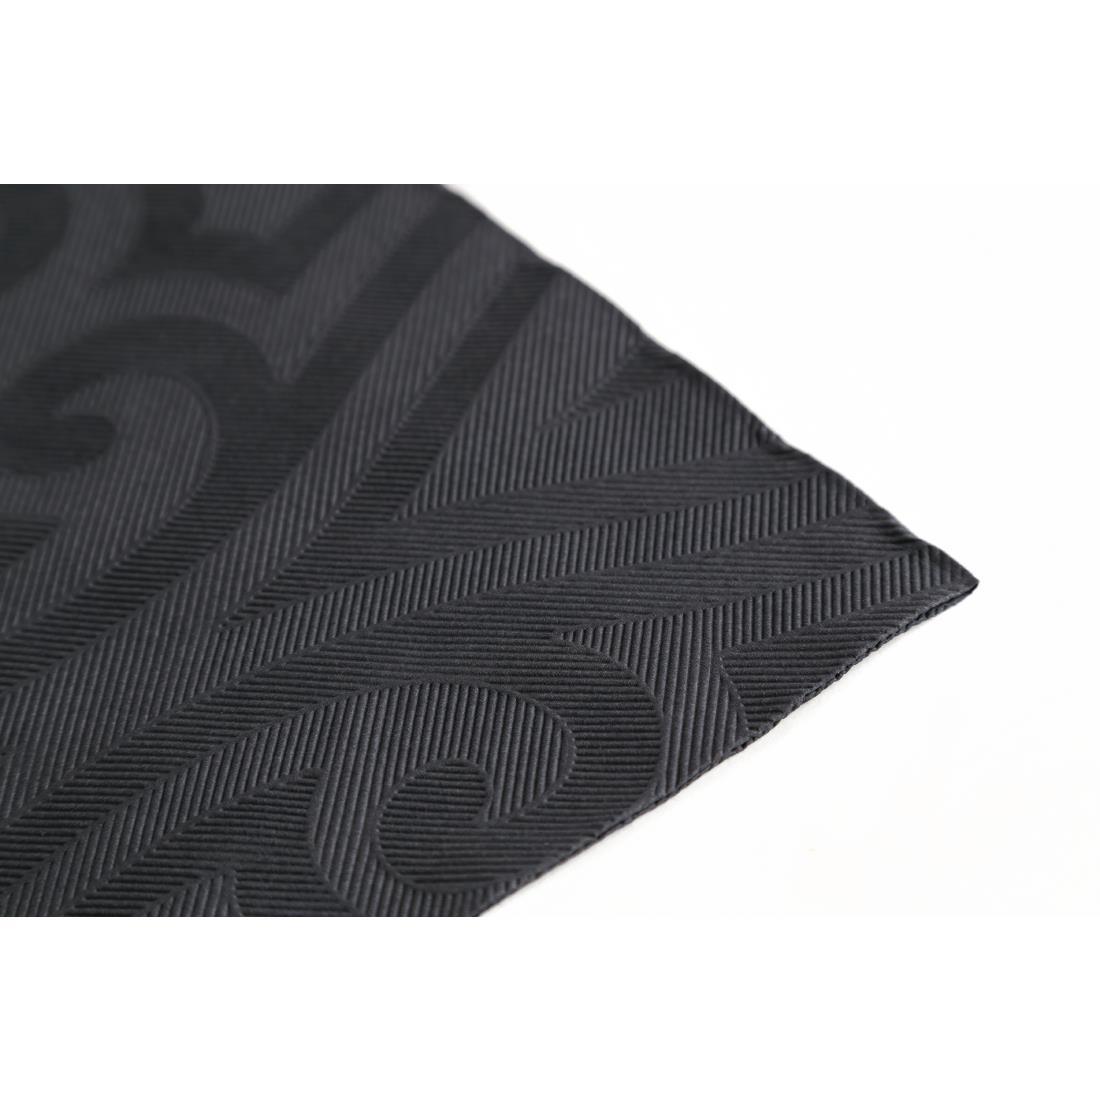 Duni Occasional Recyclable Napkins Black 480mm (Pack of 240)